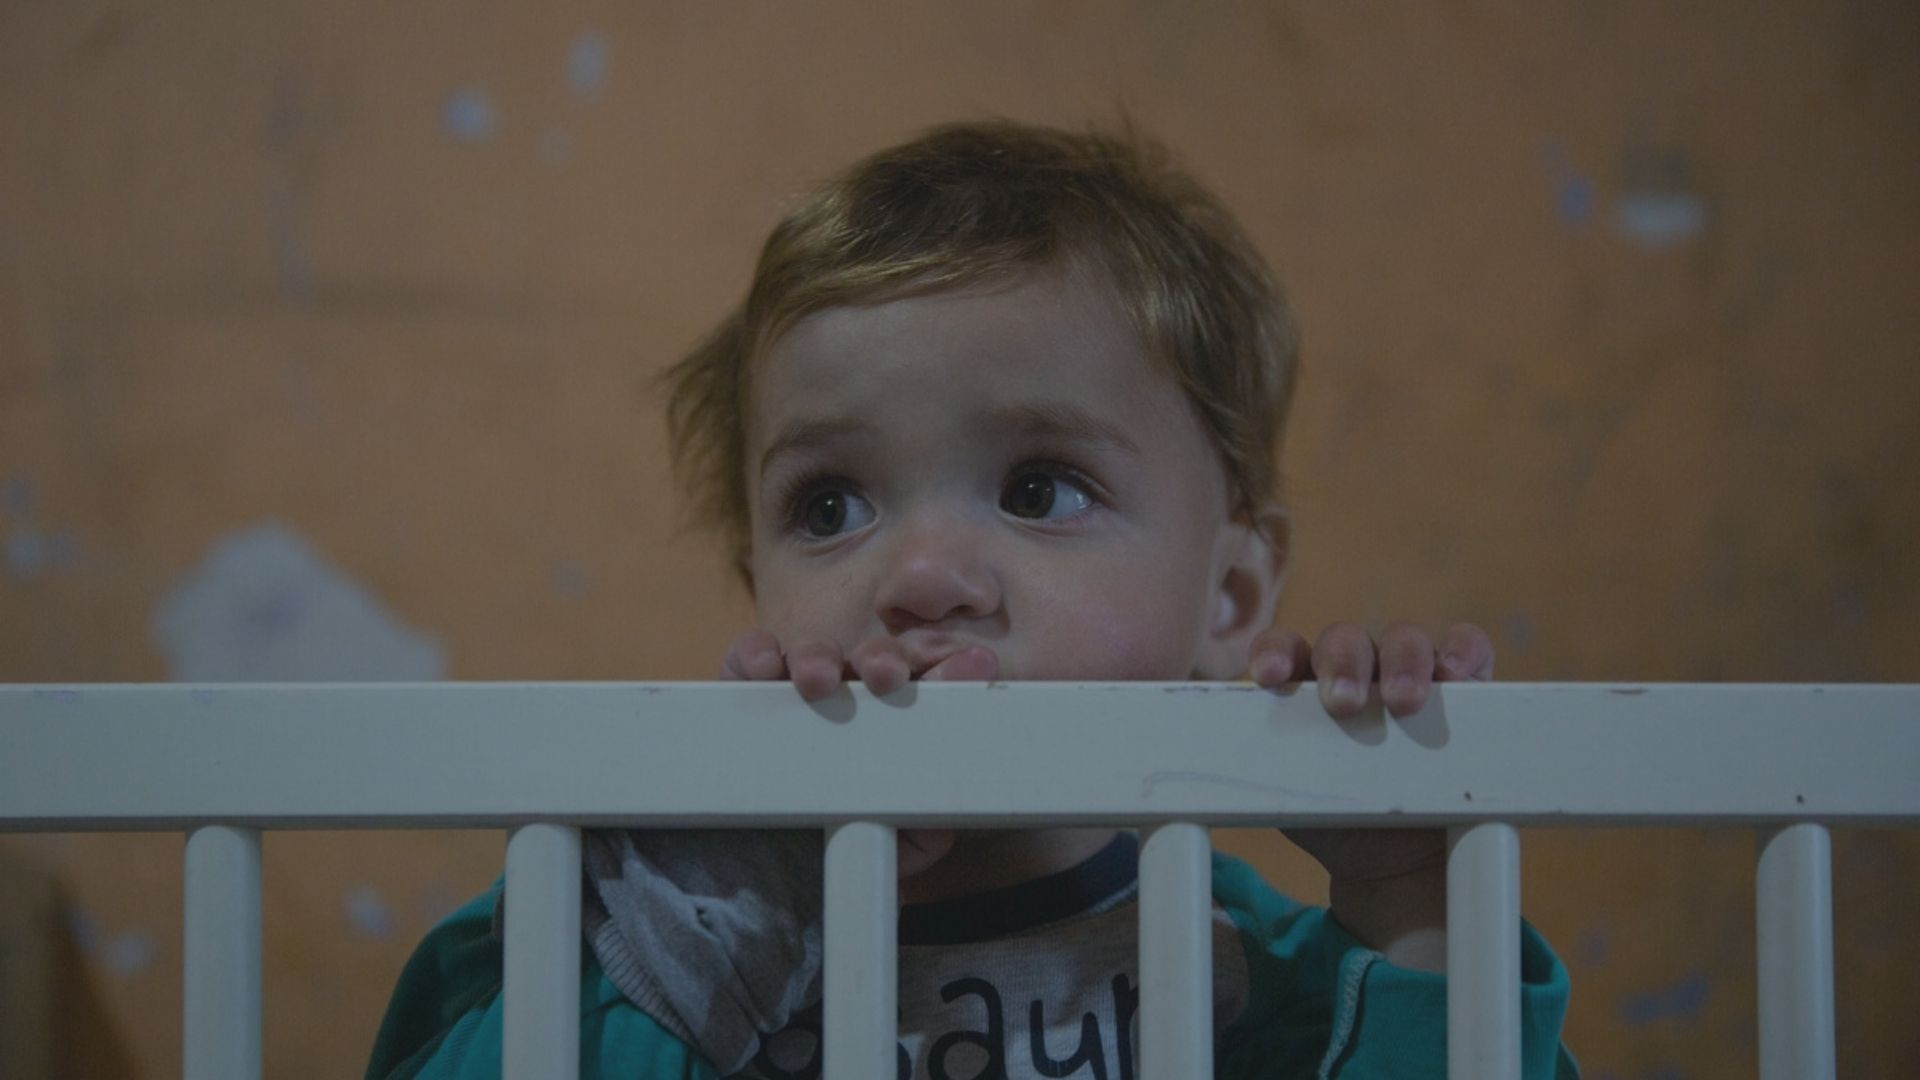 Child at risk of ending up in an orphanage peeking over the edge of their cot